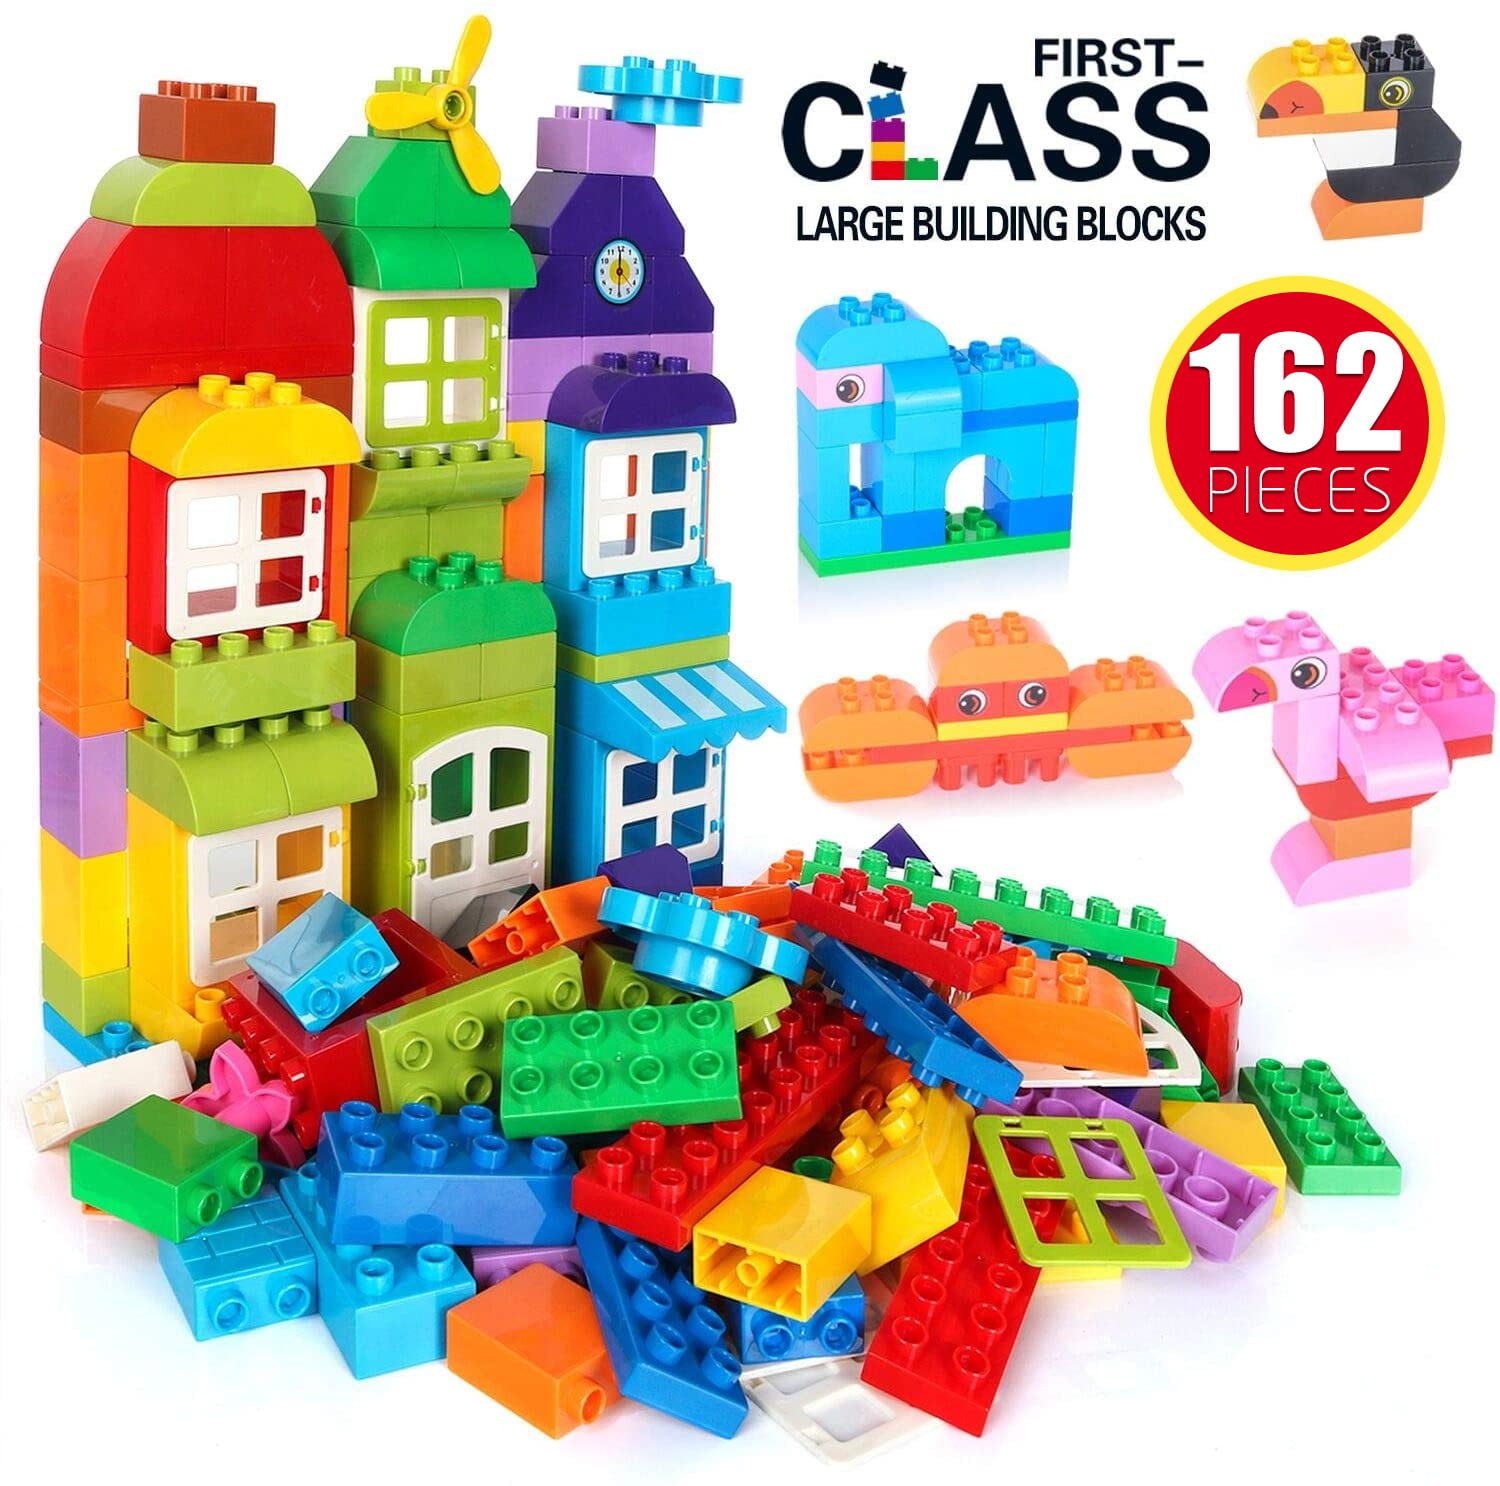 95pcs Toddlers Big Building Blocks Set Exercise N Play Kids Pre-School Toy Early Learning Big Building Blocks for Boys Girls Aged 12-40 Month 